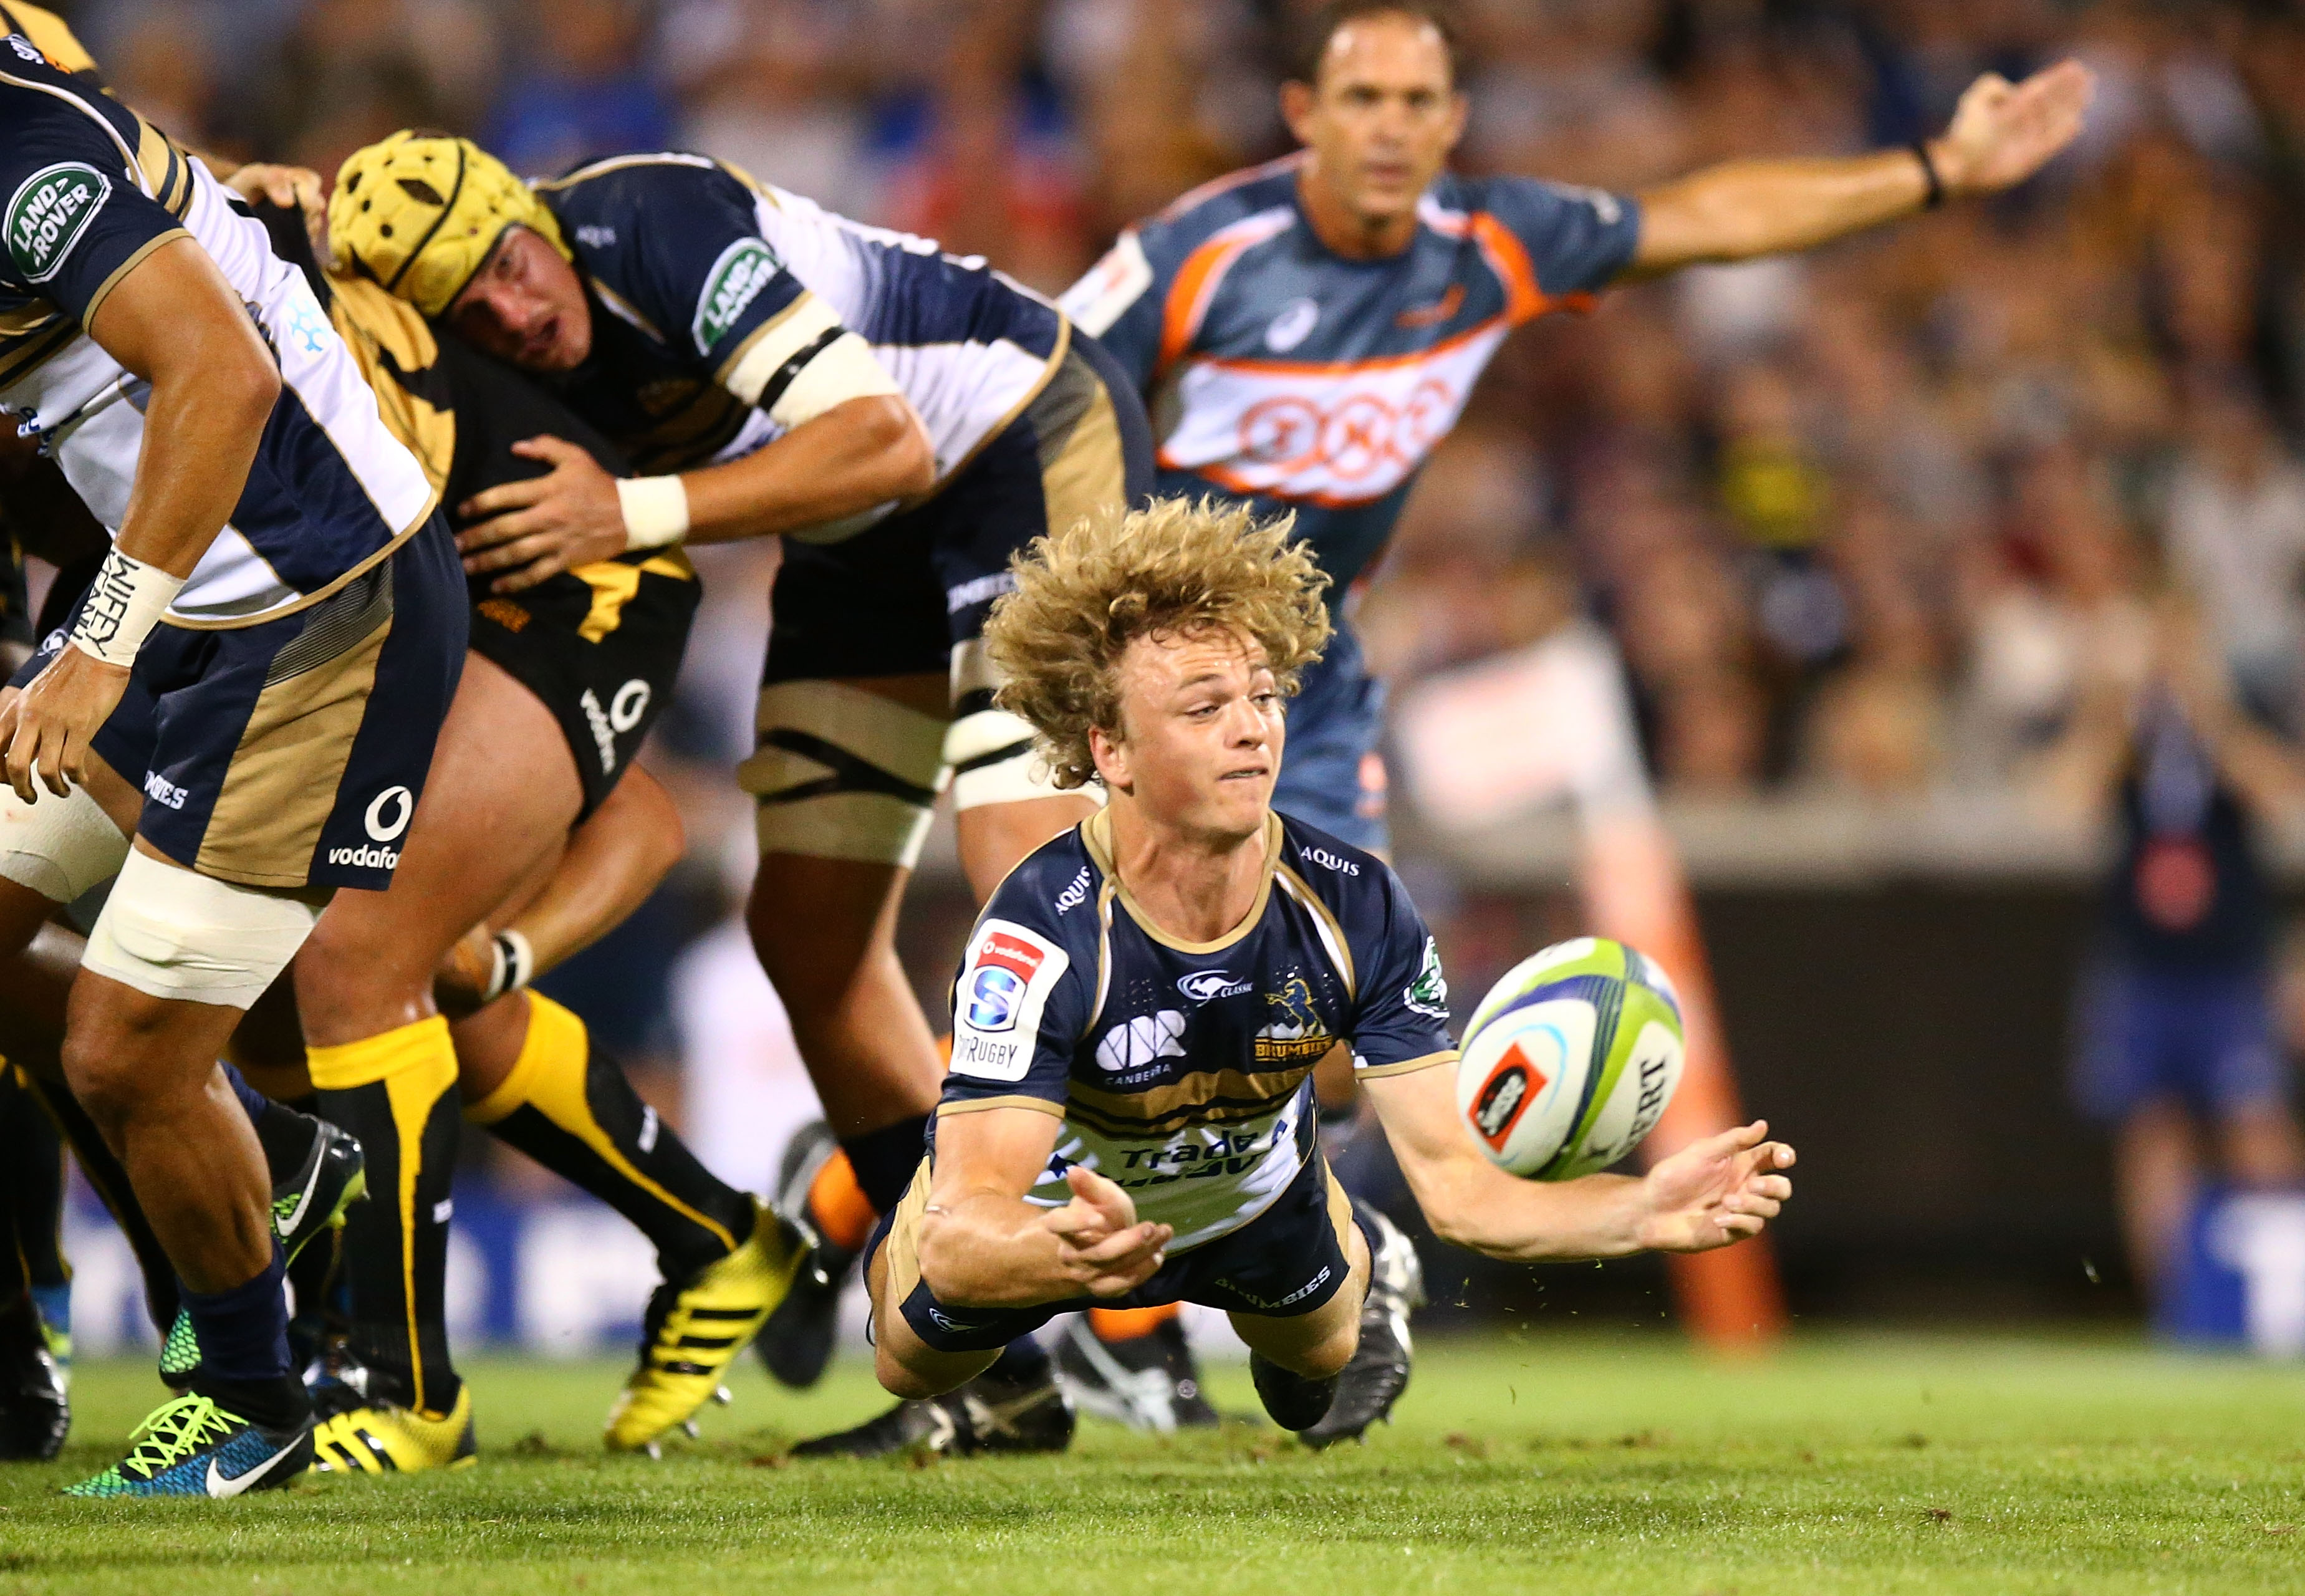 Match Highlights - Brumbies v Force - Brumbies Rugby